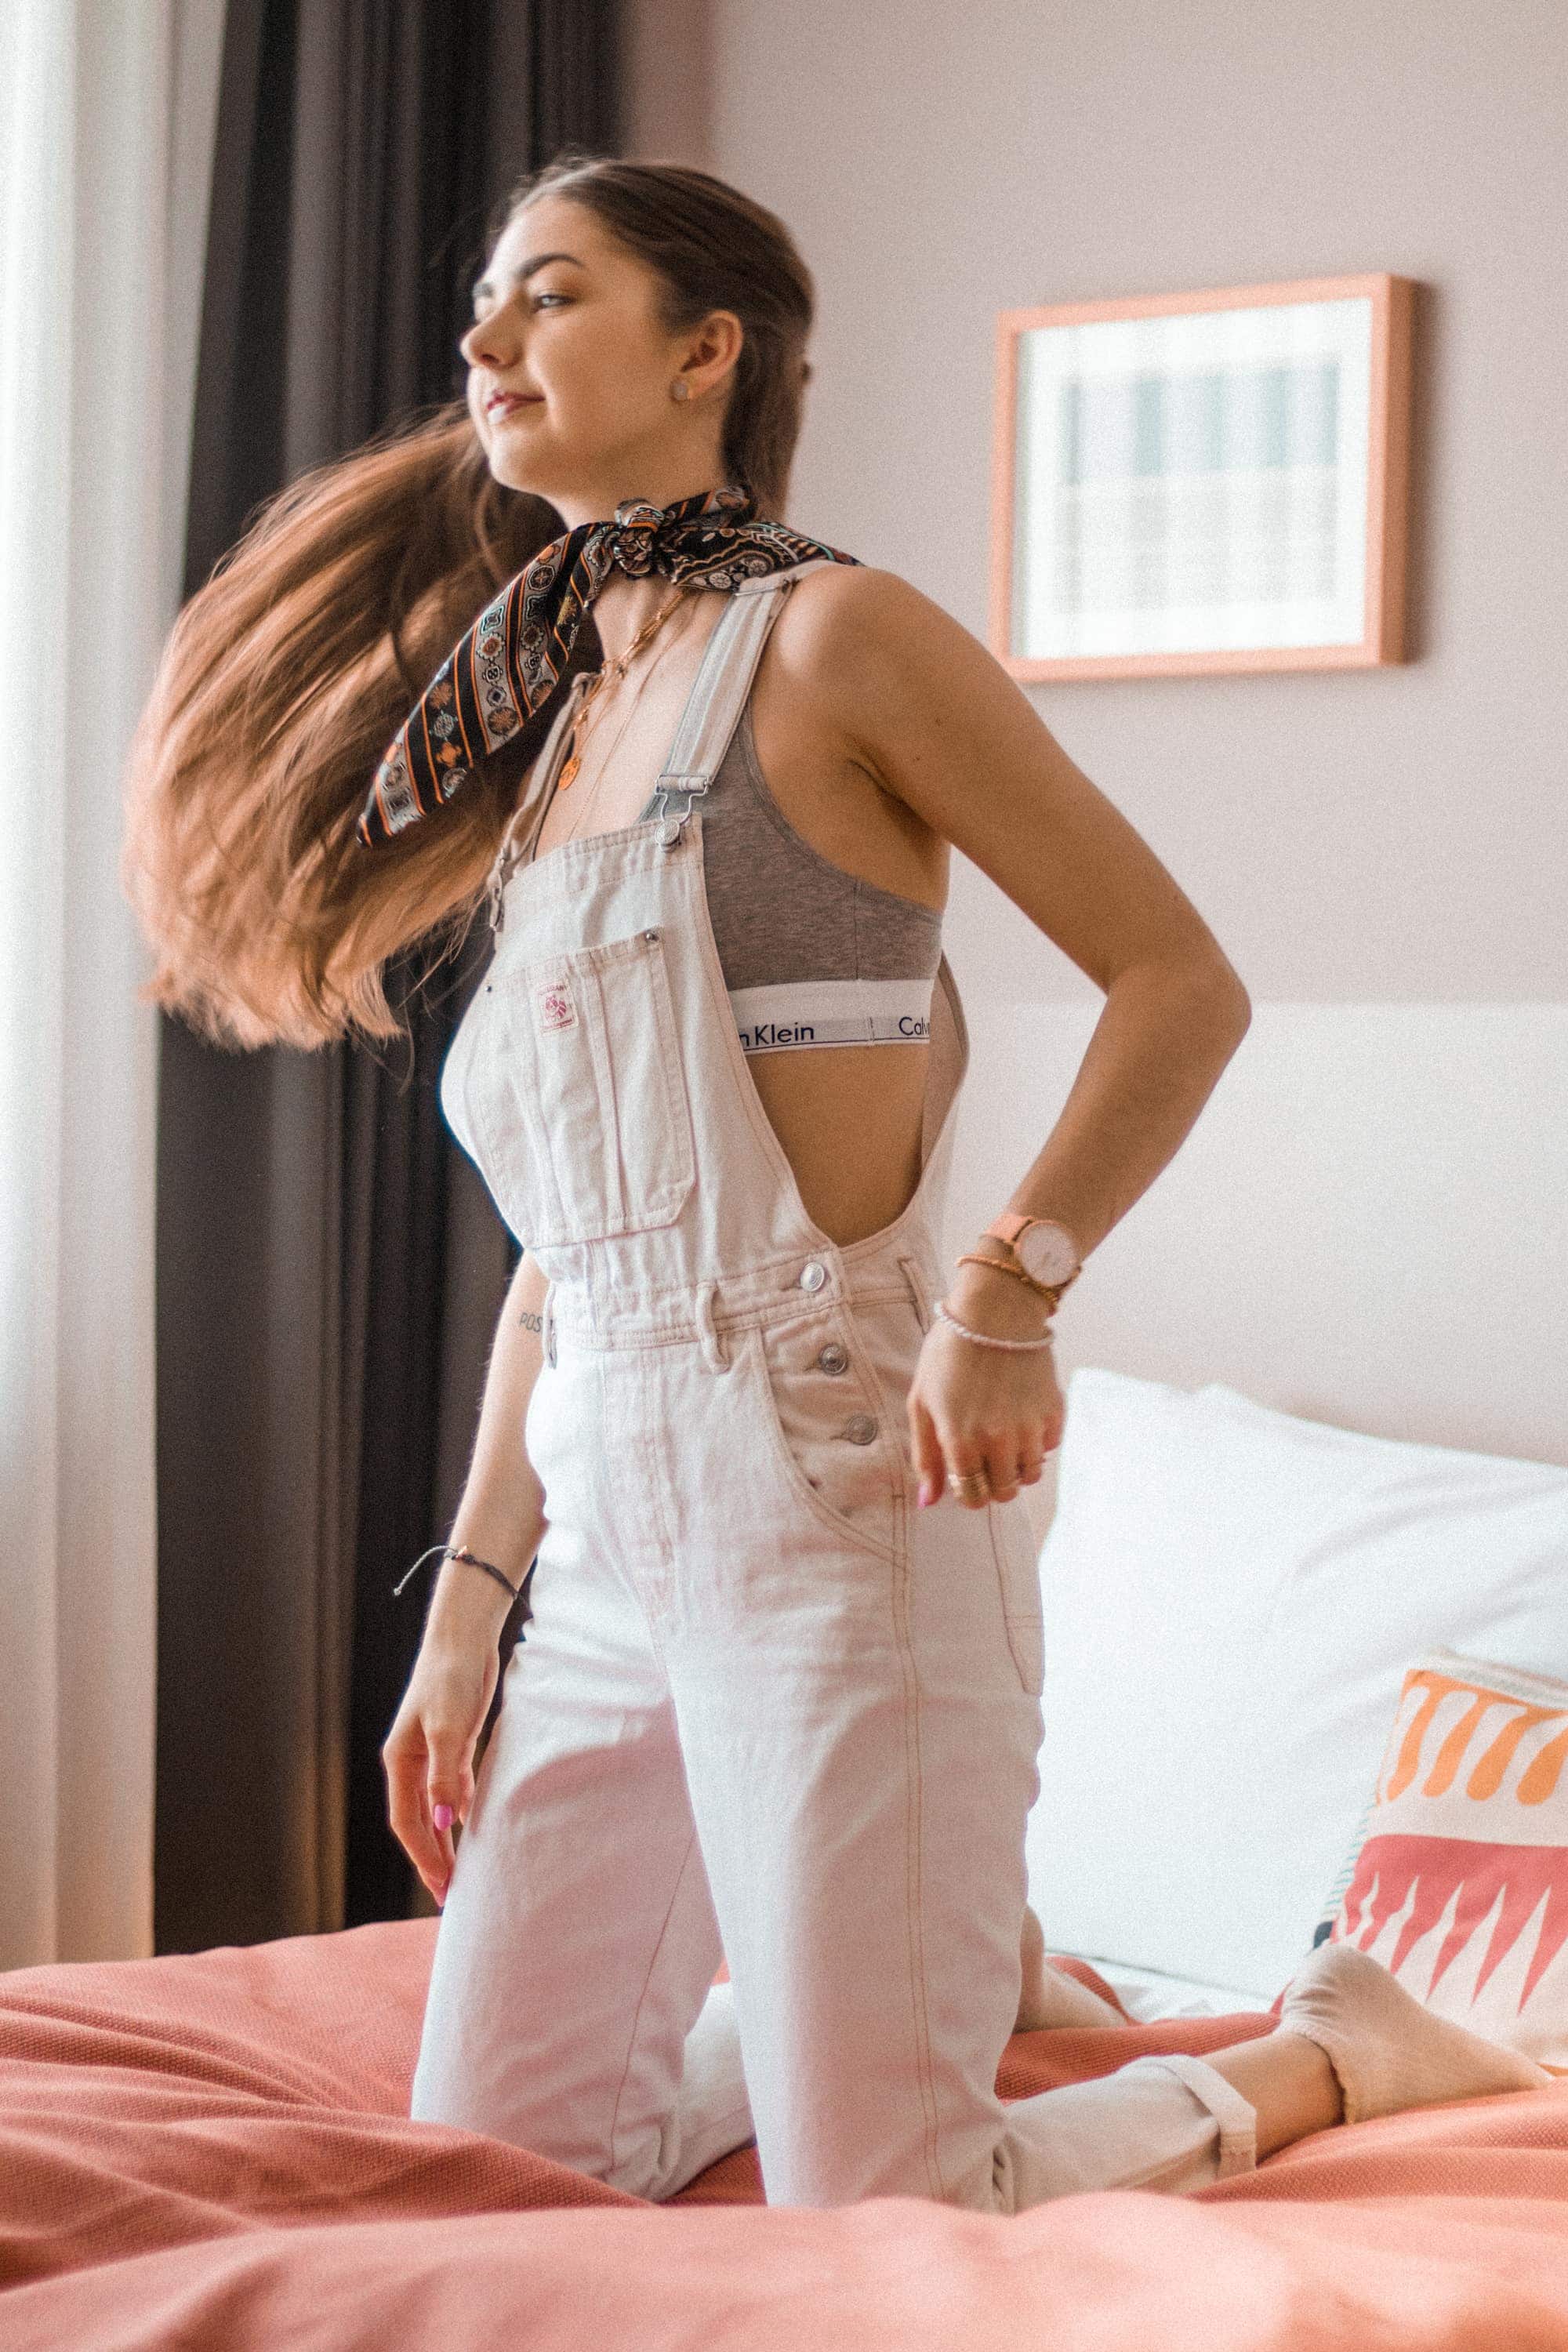 Fashion, Fashionblog, Fashion Magazine, Editorial, Style, Style Guide, Style Inspiration, Streetwear, Street Style, Swiss, Switzerland, Outift, OOTD, Outfit Inspiration, Inspo, Girly, Edgy, Stylish, Trends, Trend, Trendsetter, Carmitive, Carmen Jenny, Dungarees, Neckerchief, Calvin Klein, In my Calvins, Hotel Room, Hotel Goals, Travel, Fun, Humor, Column, Girls Outfits, Style Inspiration, Munich, Munich Hotels